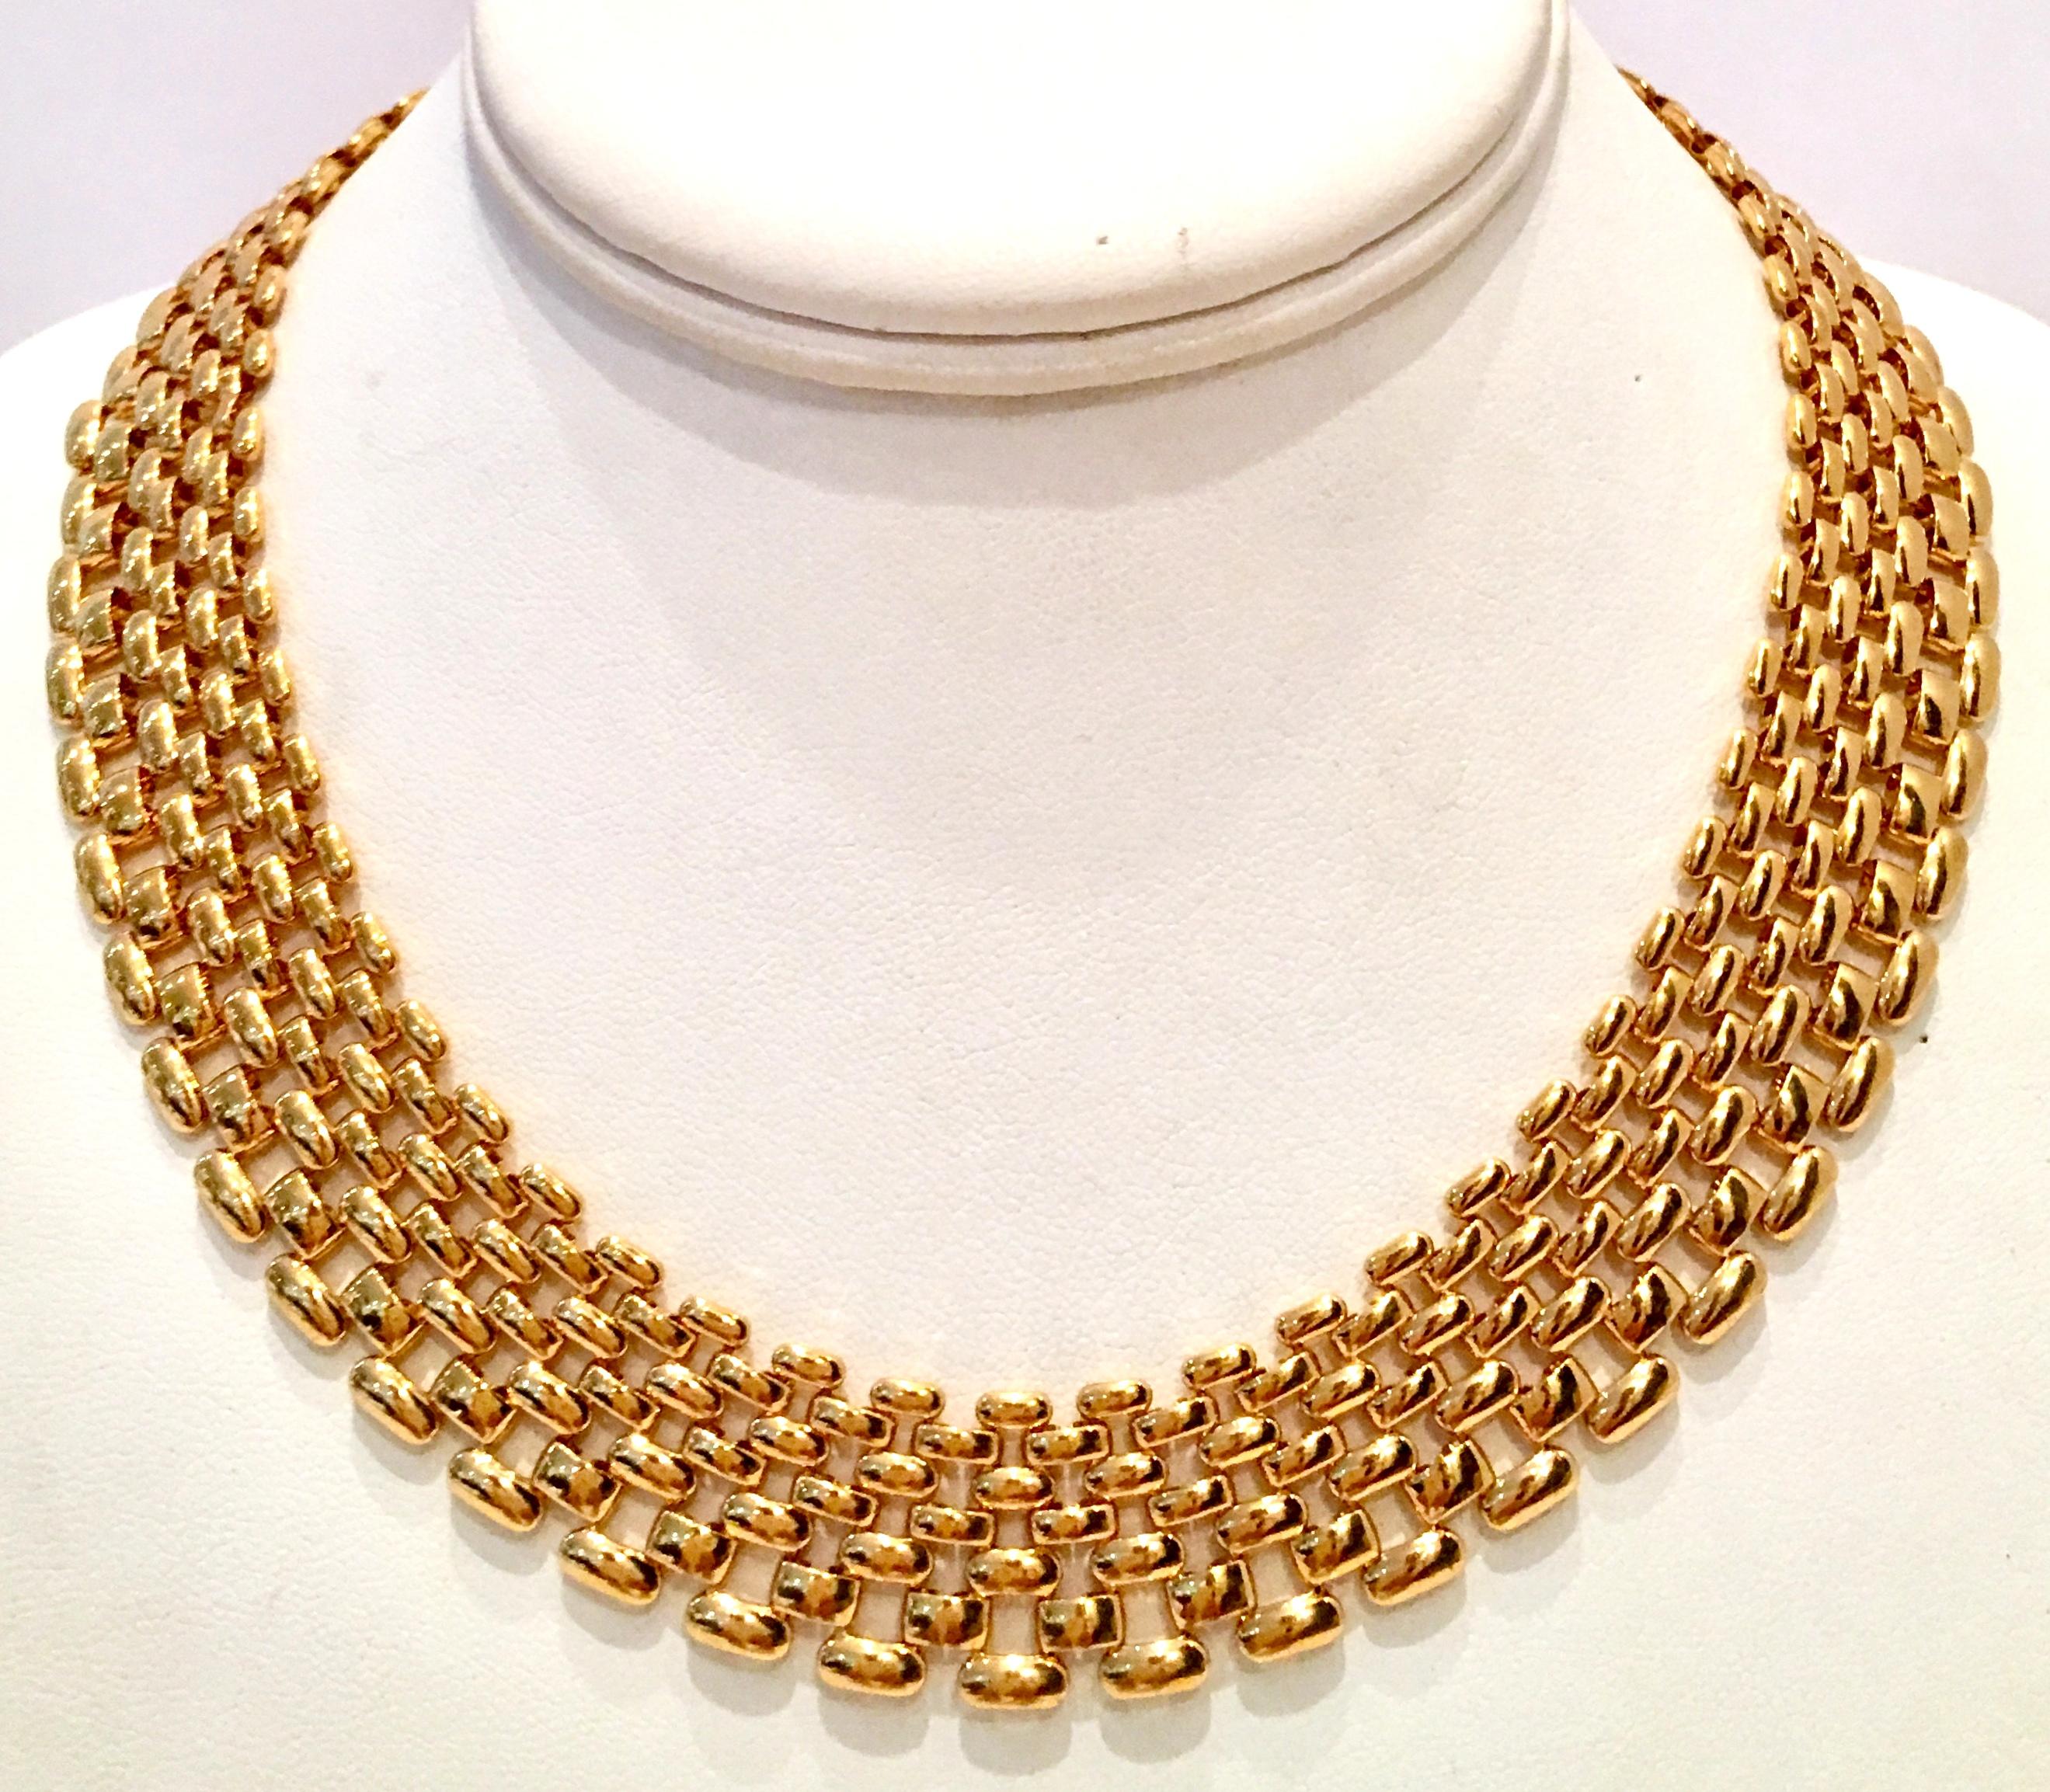 20th Century Gold Plate Chain Link Choker Style Necklace By, Napier. Signed Napier on the fold over box style locking clasp. 